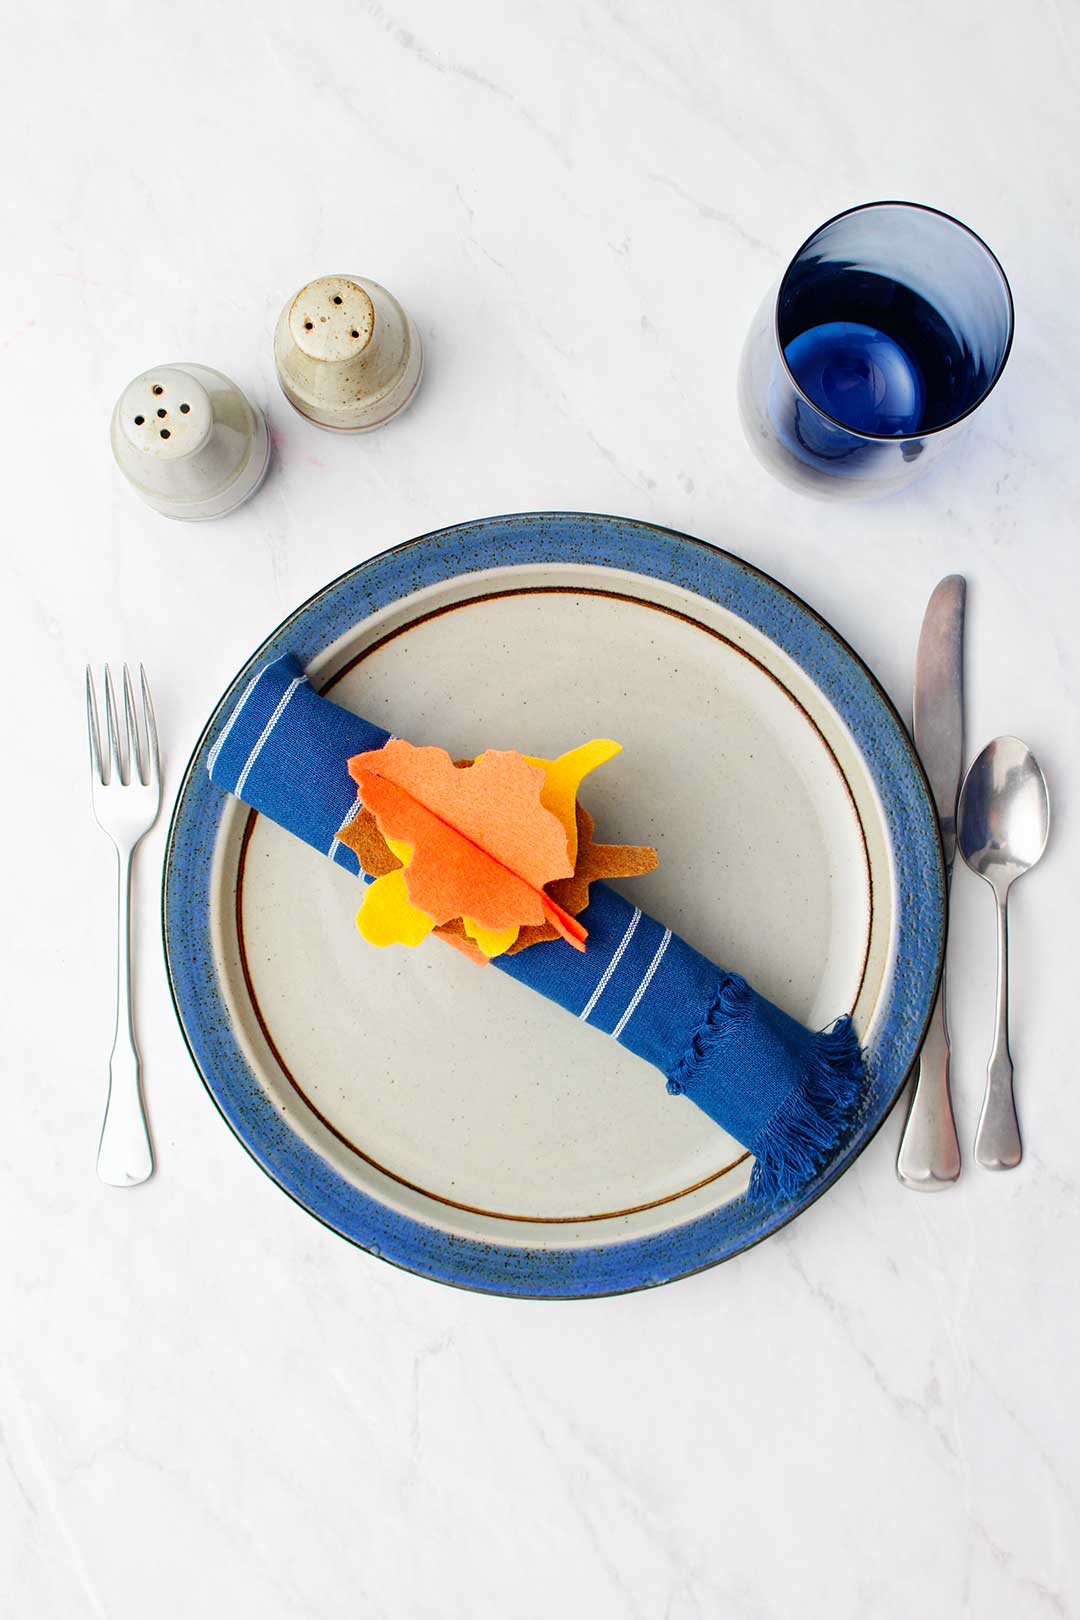 Overhead view of a table setting with plate, silverware, salt and pepper shakers, blue glass and dark blue napkin with No-Sew Felt Thanksgiving Napkin Ring holder.